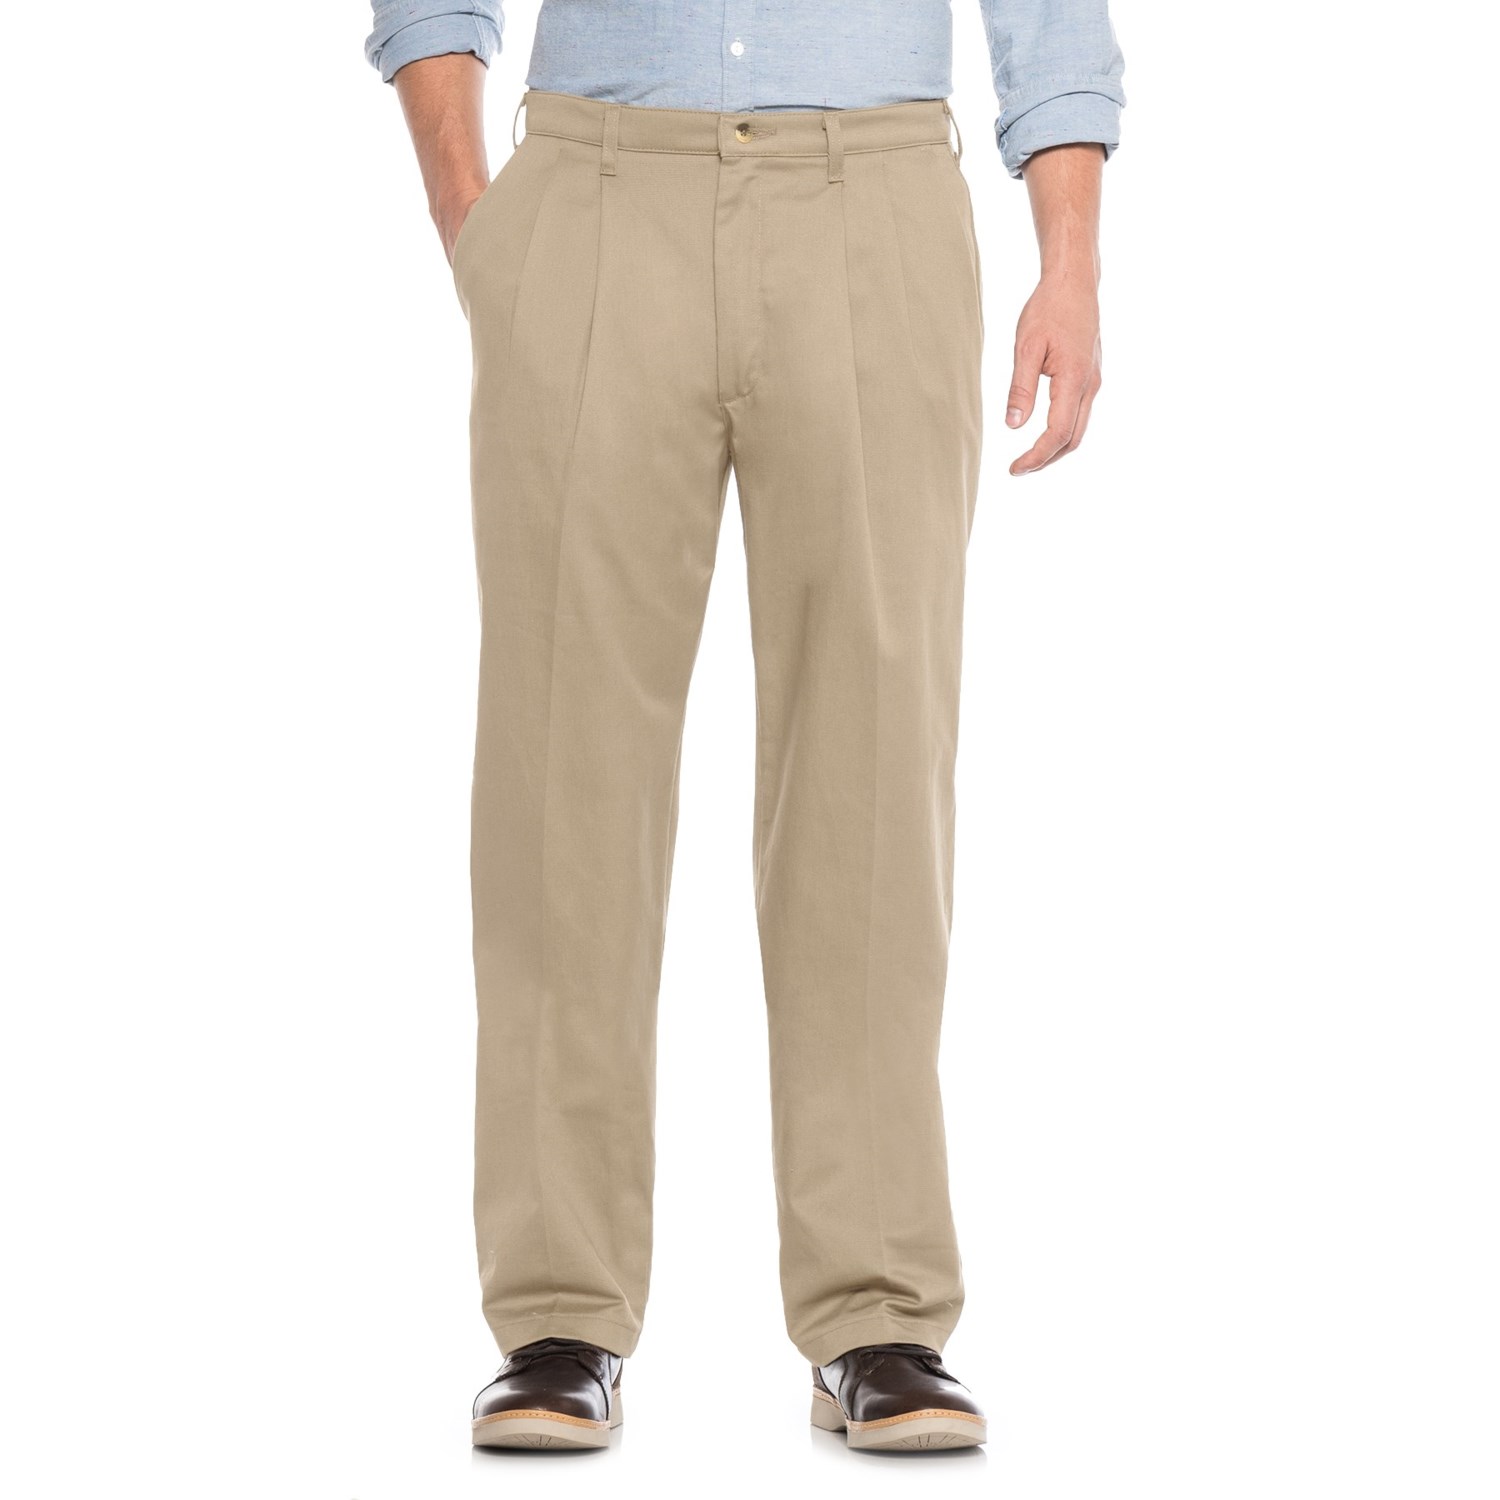 No-Iron Cotton Twill Pants (For Men) - Save 48%